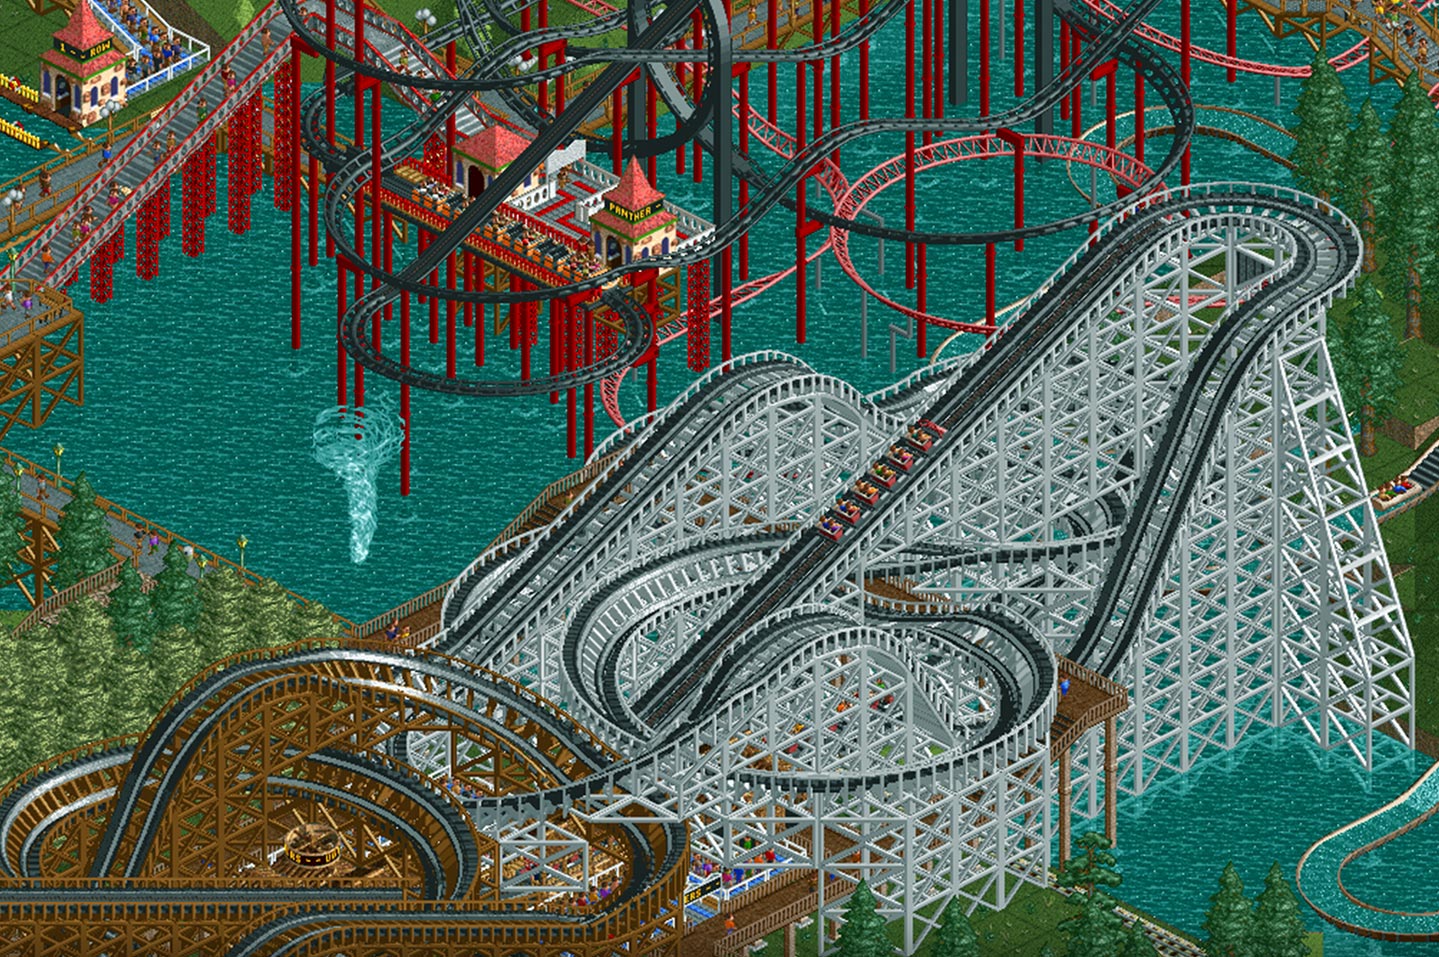 Download & Play RollerCoaster Tycoon Classic on PC & Mac (Emulator);